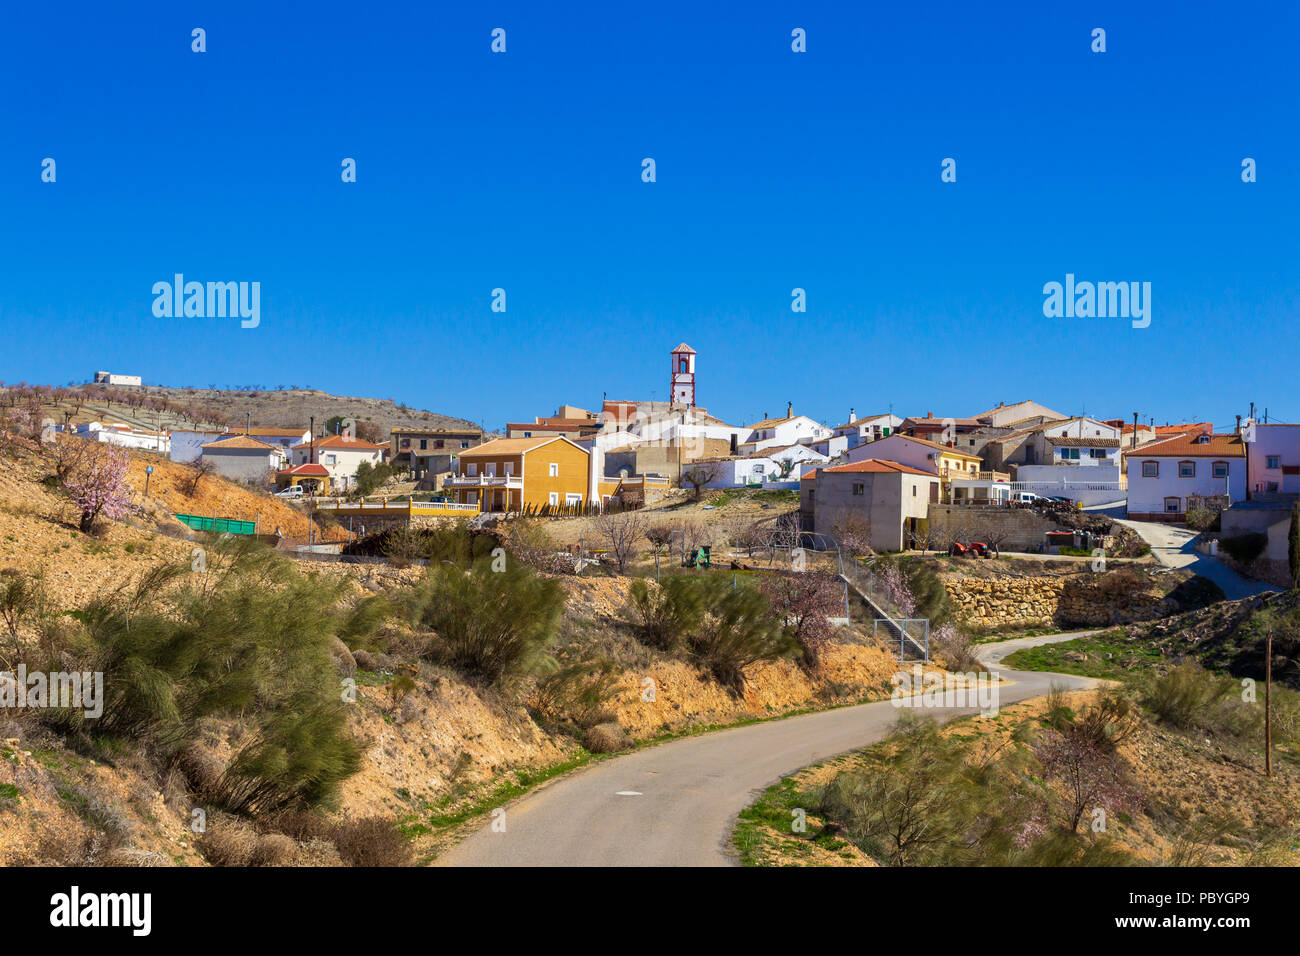 Los Cerricos, Small Rural Town in Andalusia, Spain Stock Photo